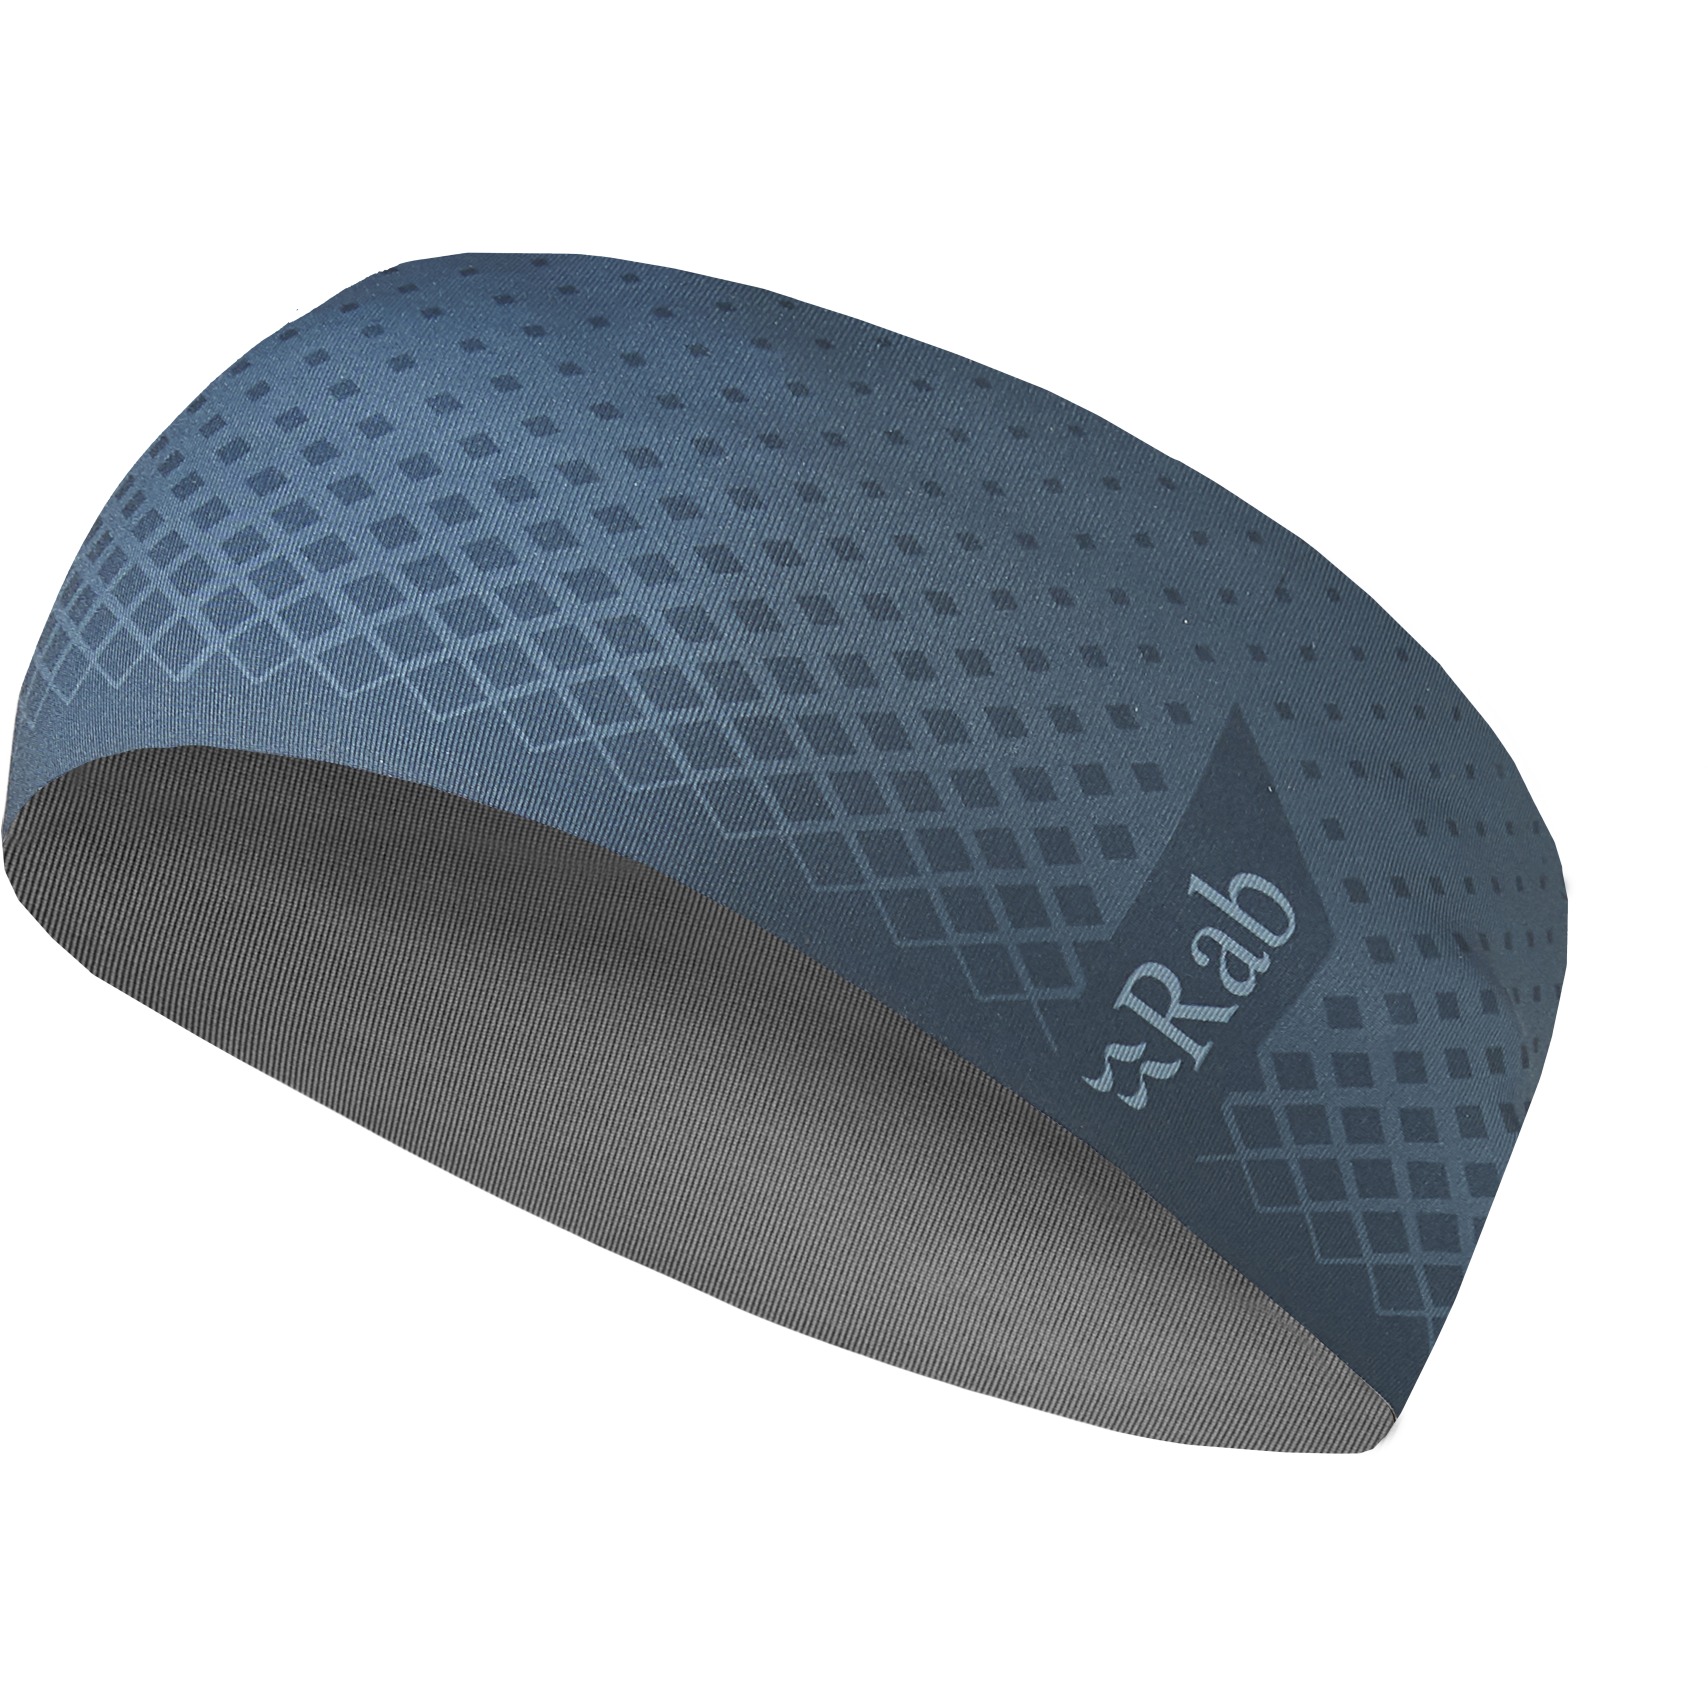 Picture of Rab Transition Windstopper Headband - orion blue